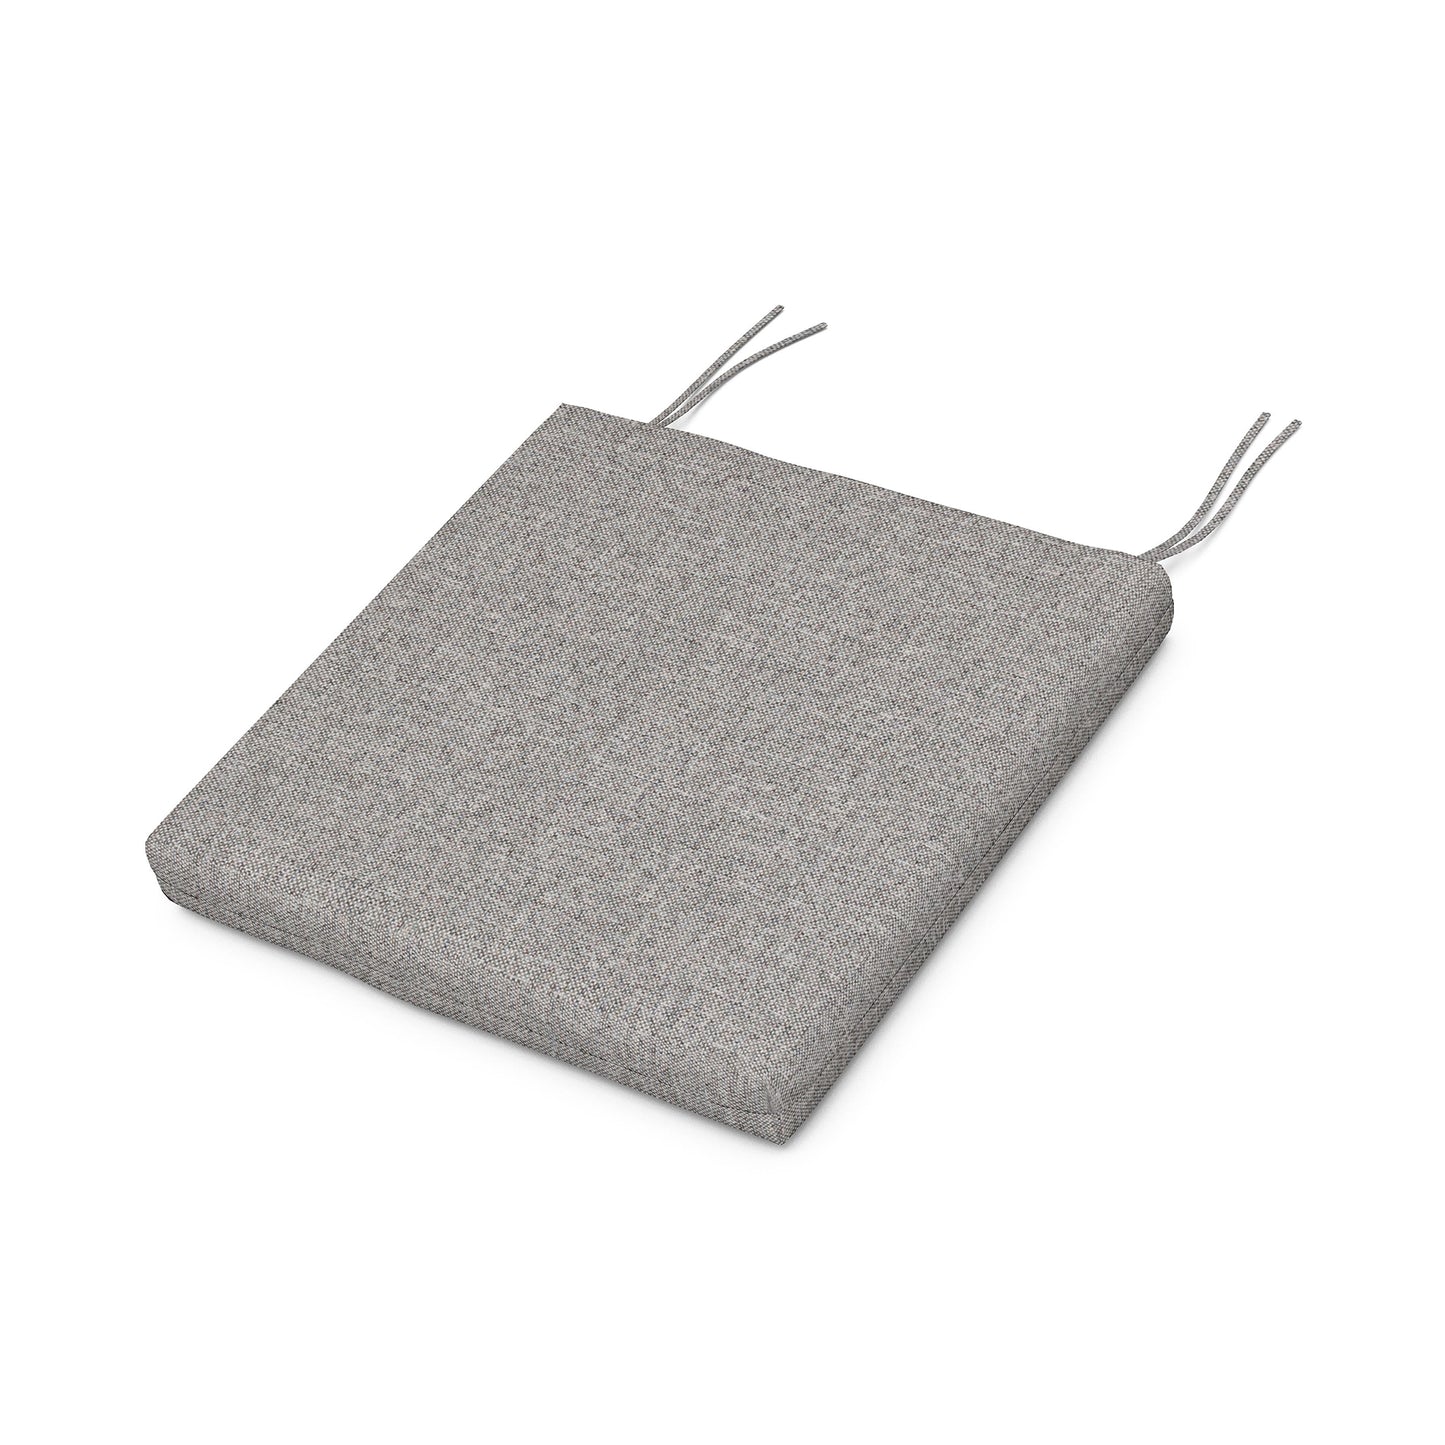 A grey square XPWS0006 - Seat Cushion made with weather-resistant upholstery fabric on a white background, by POLYWOOD.